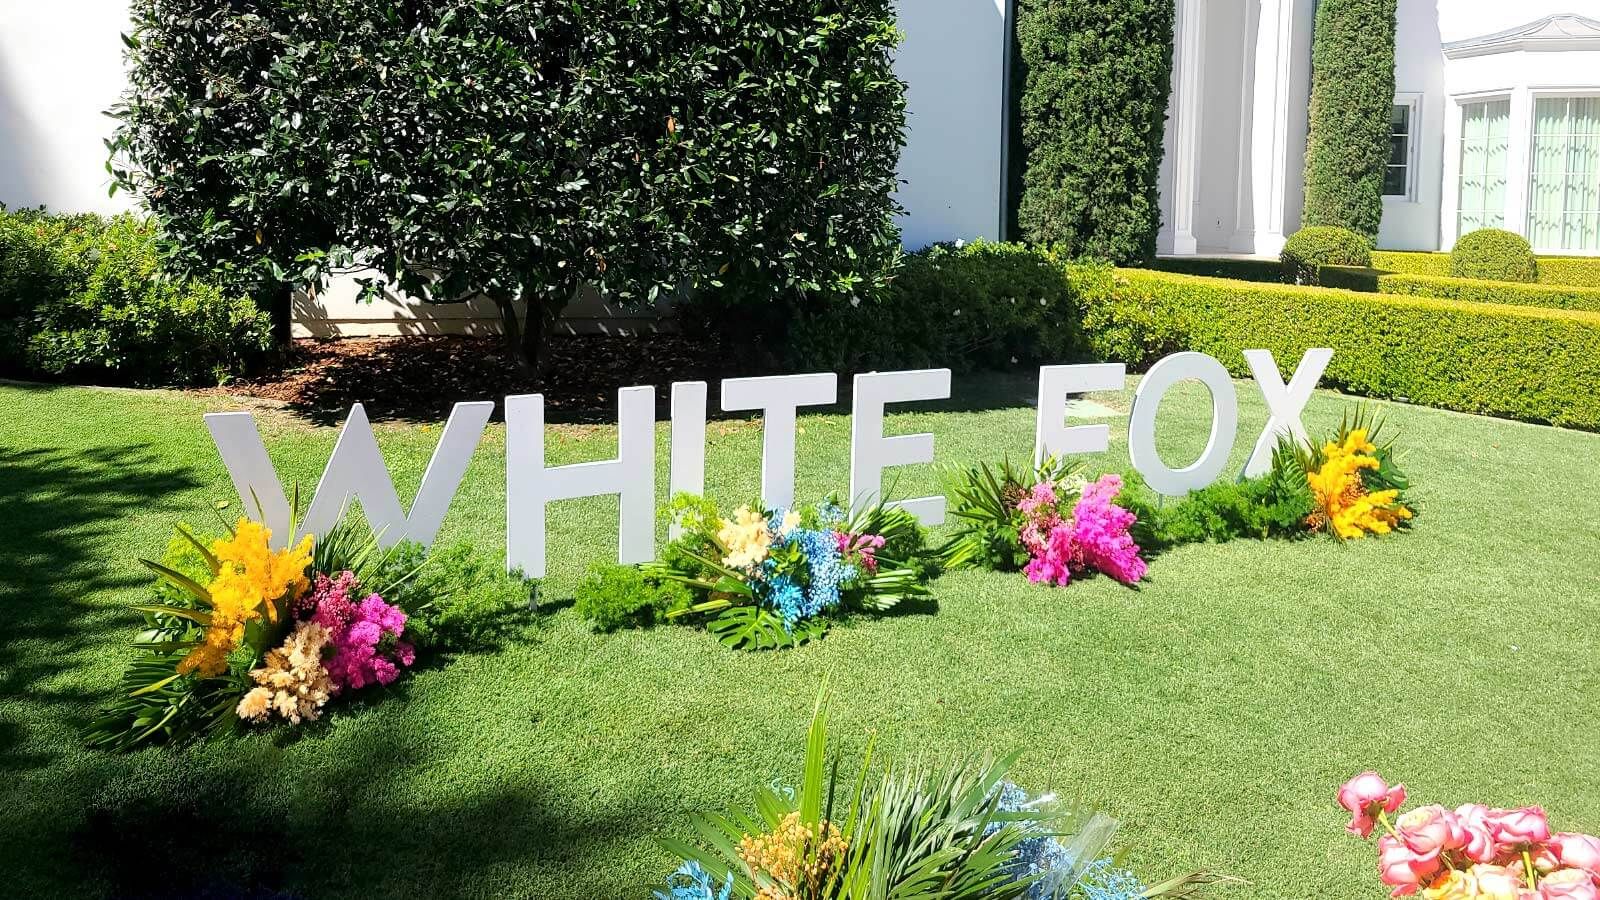 White Fox 3D logo sign placed outdoors